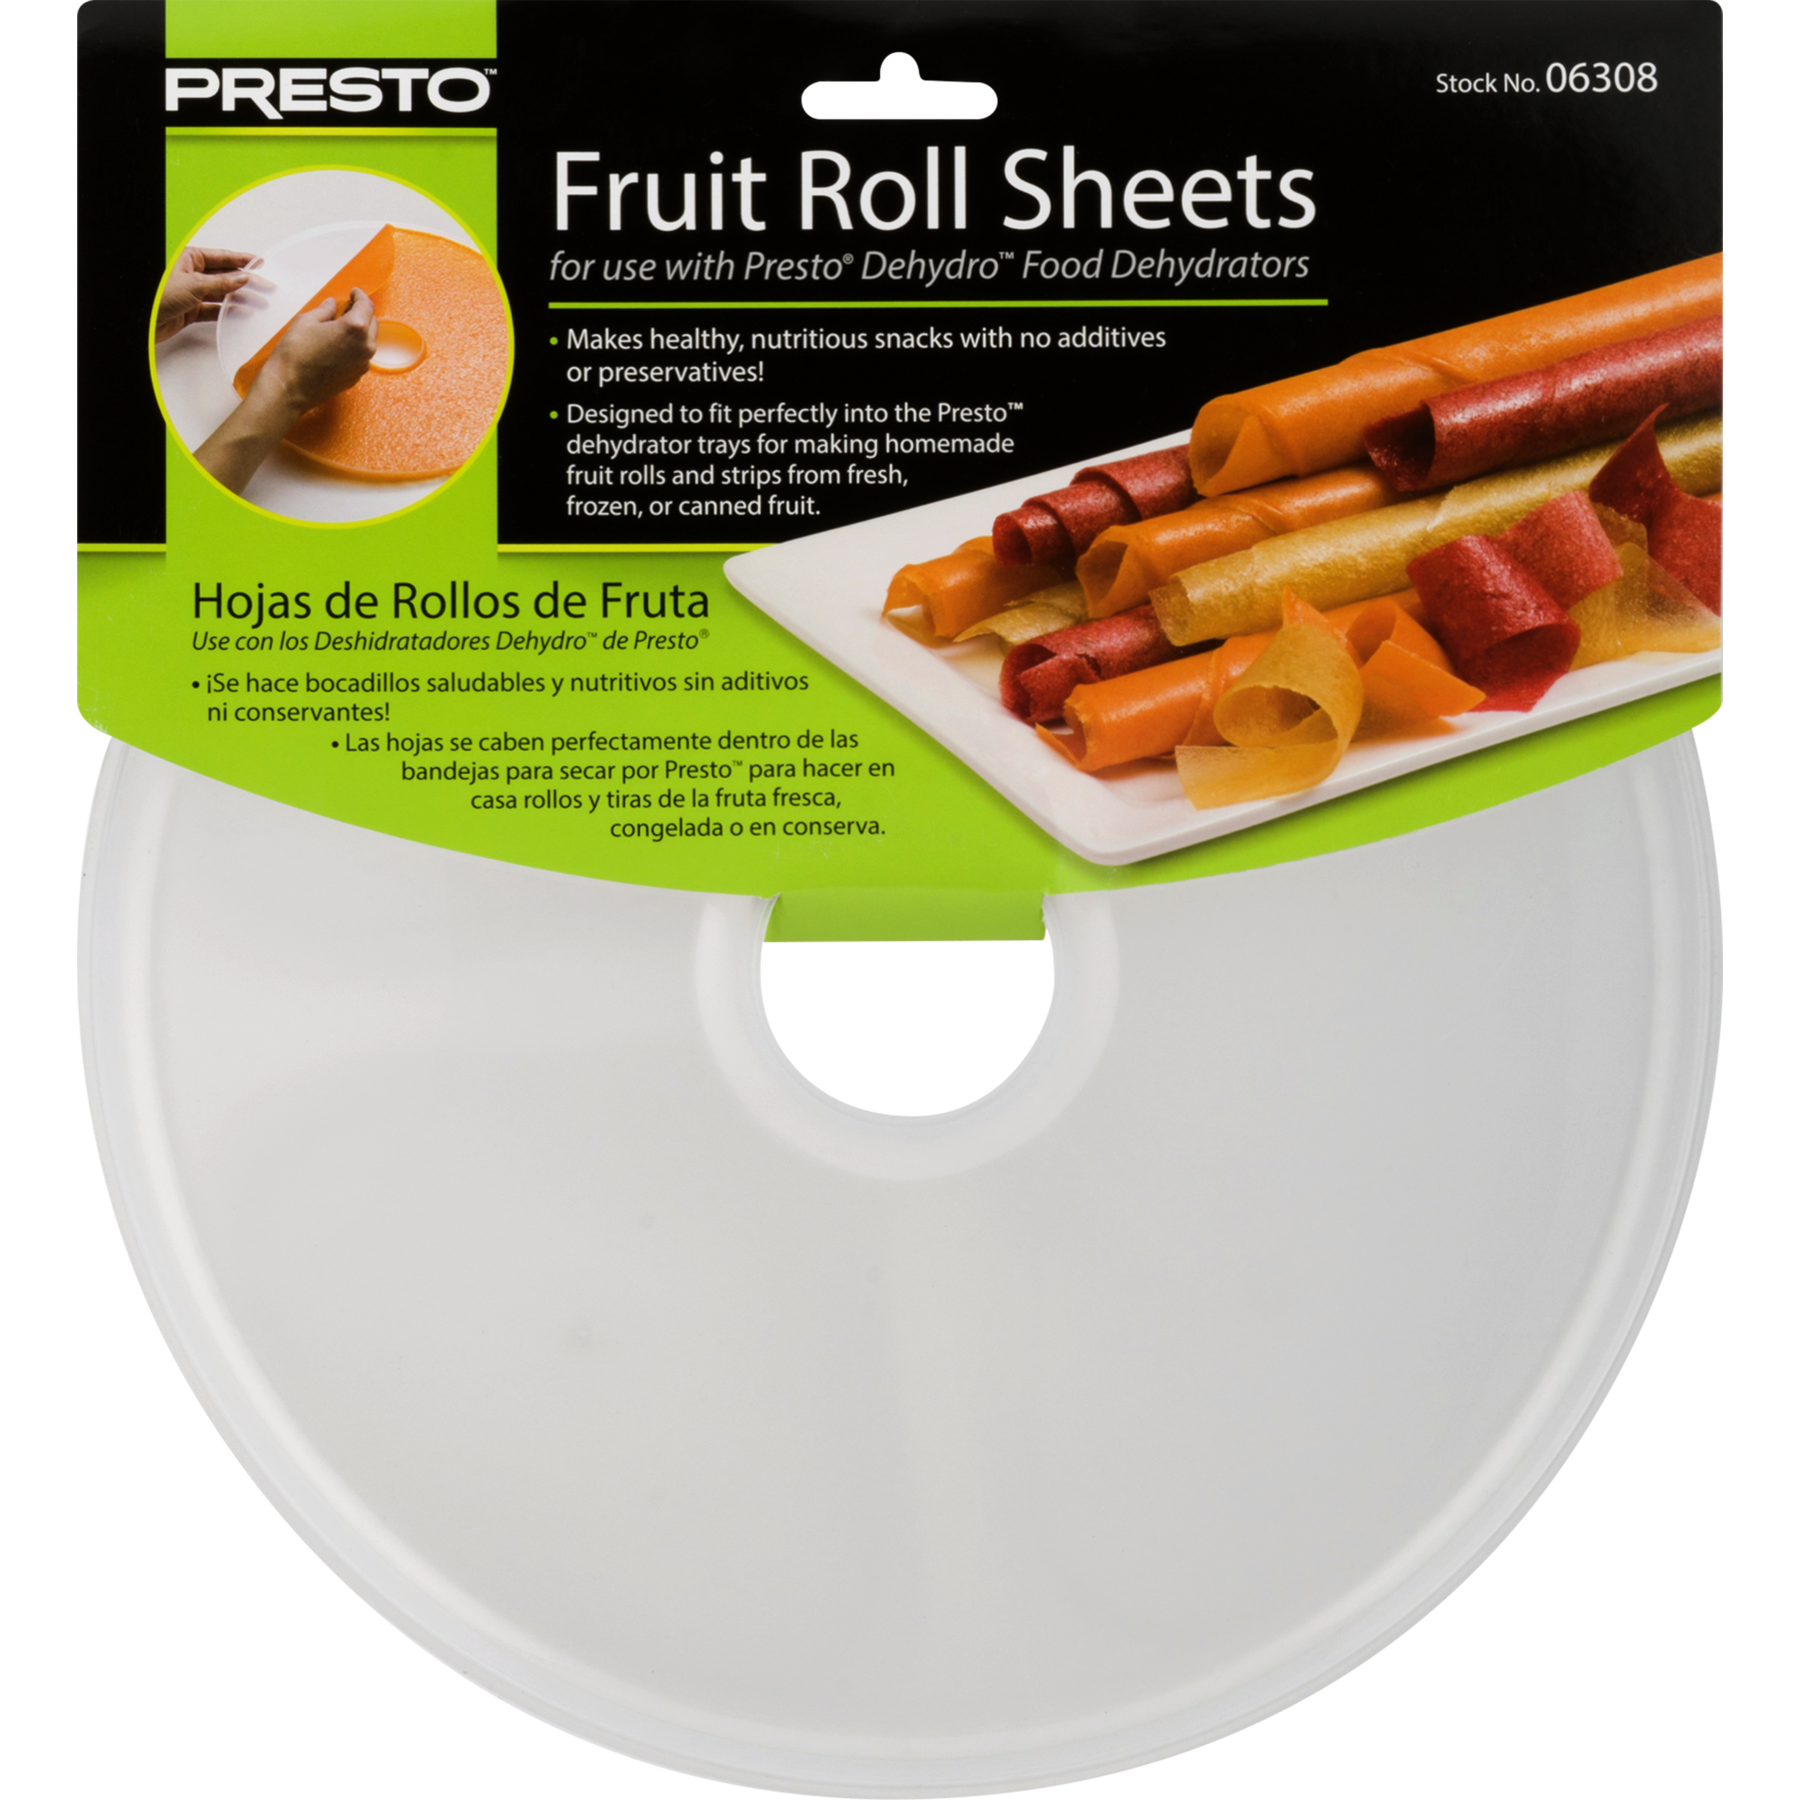 Presto Fruit Rolls Sheets, 2 Count - image 4 of 6